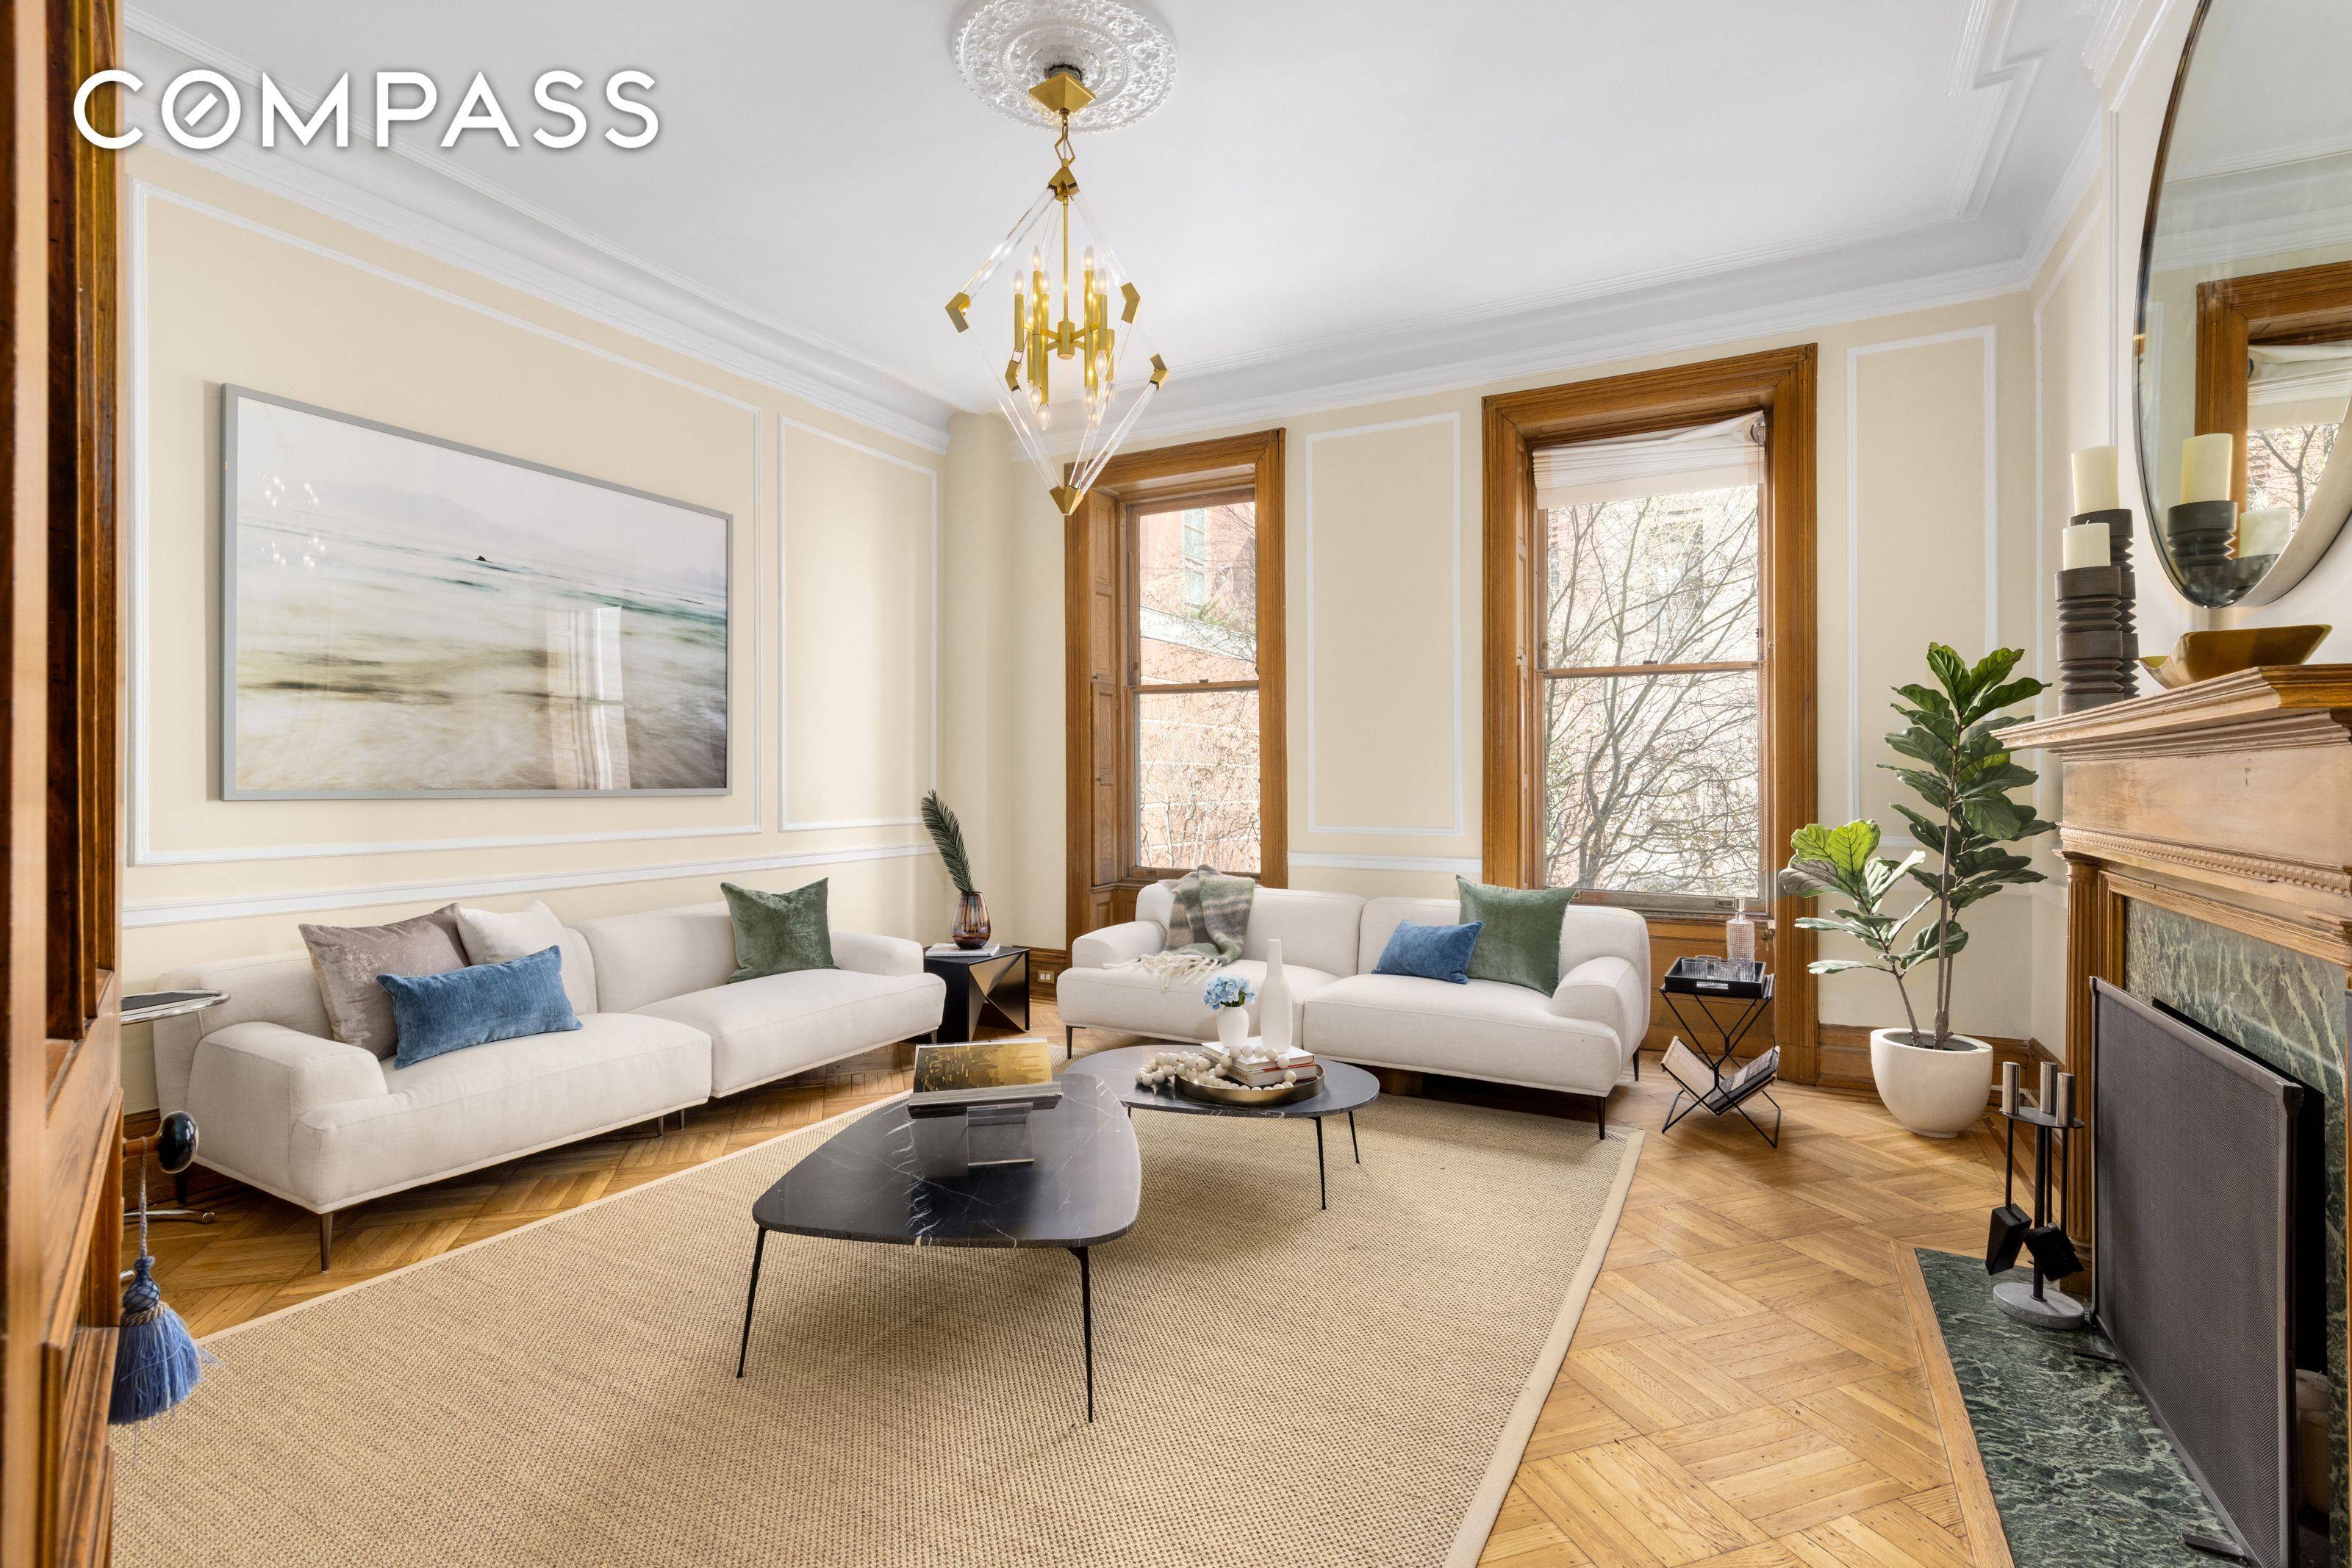 With five sun flooded floors on a prime Central Park block, this 18 foot wide single family Queen Anne style home is move in ready for its lucky new tenant.